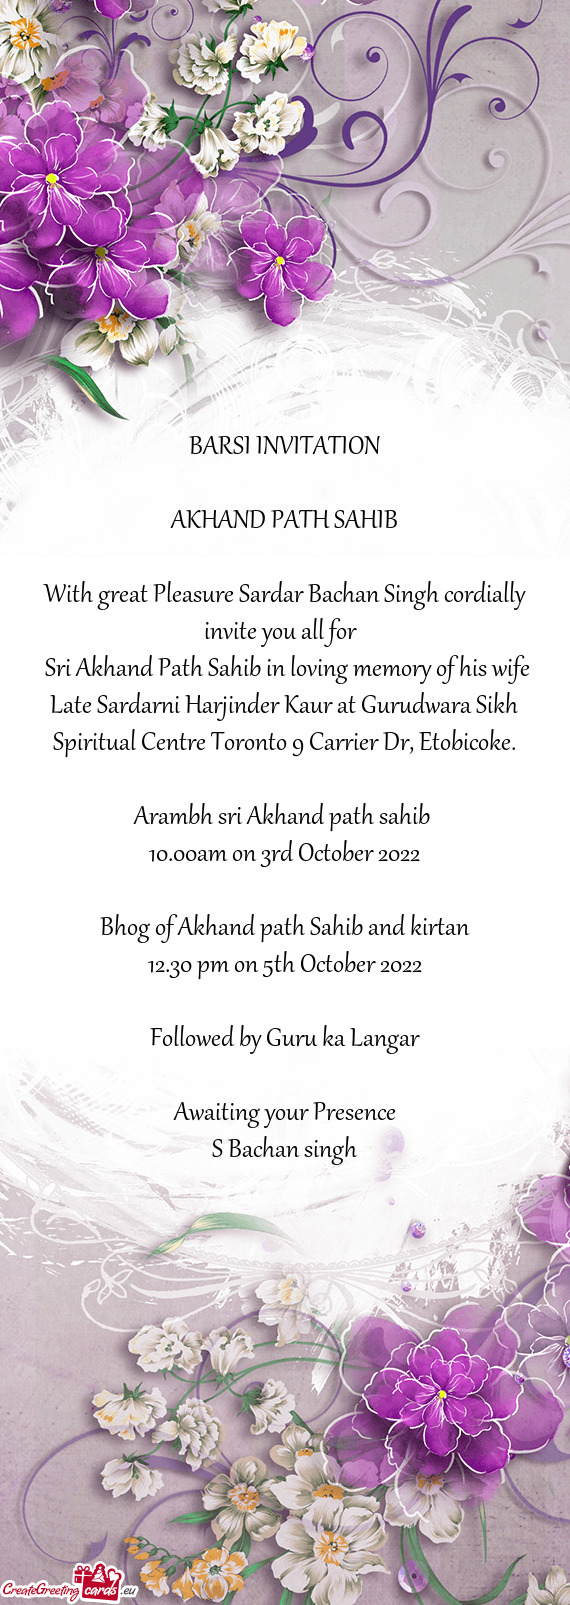 With great Pleasure Sardar Bachan Singh cordially invite you all for